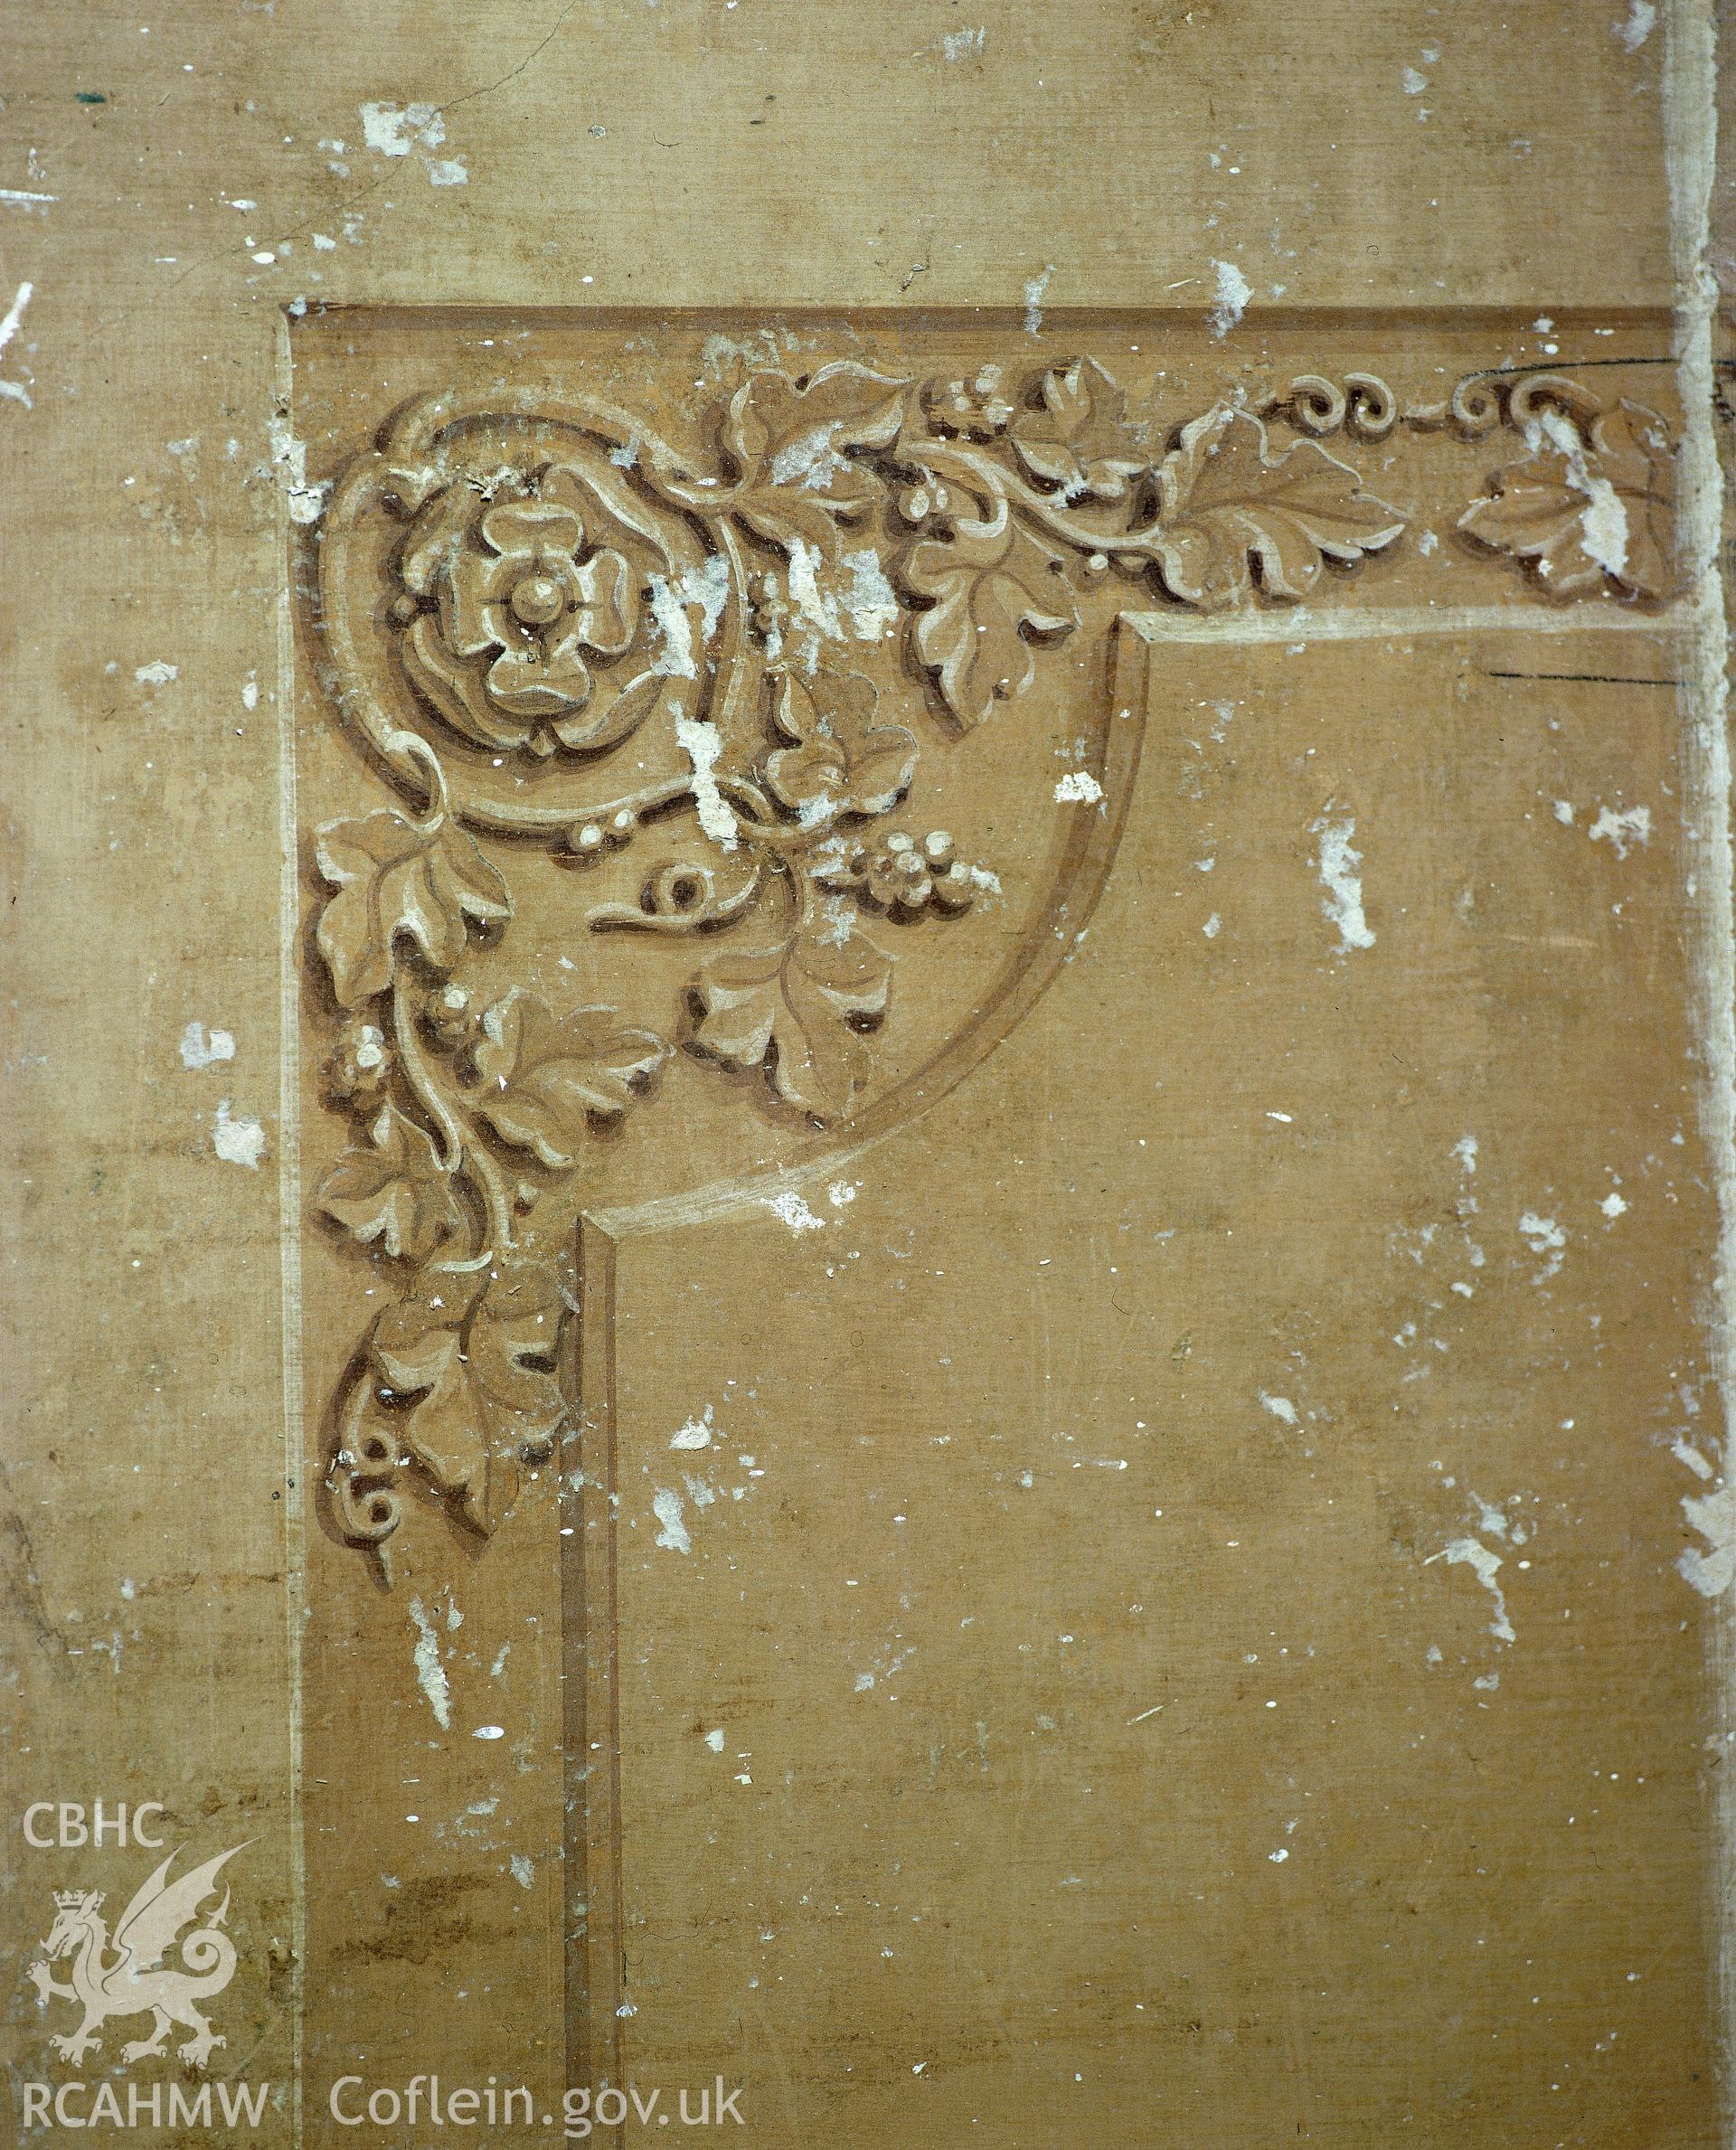 RCAHMW colour transparency showing decorative plasterwork at Rheola House, Resolven.